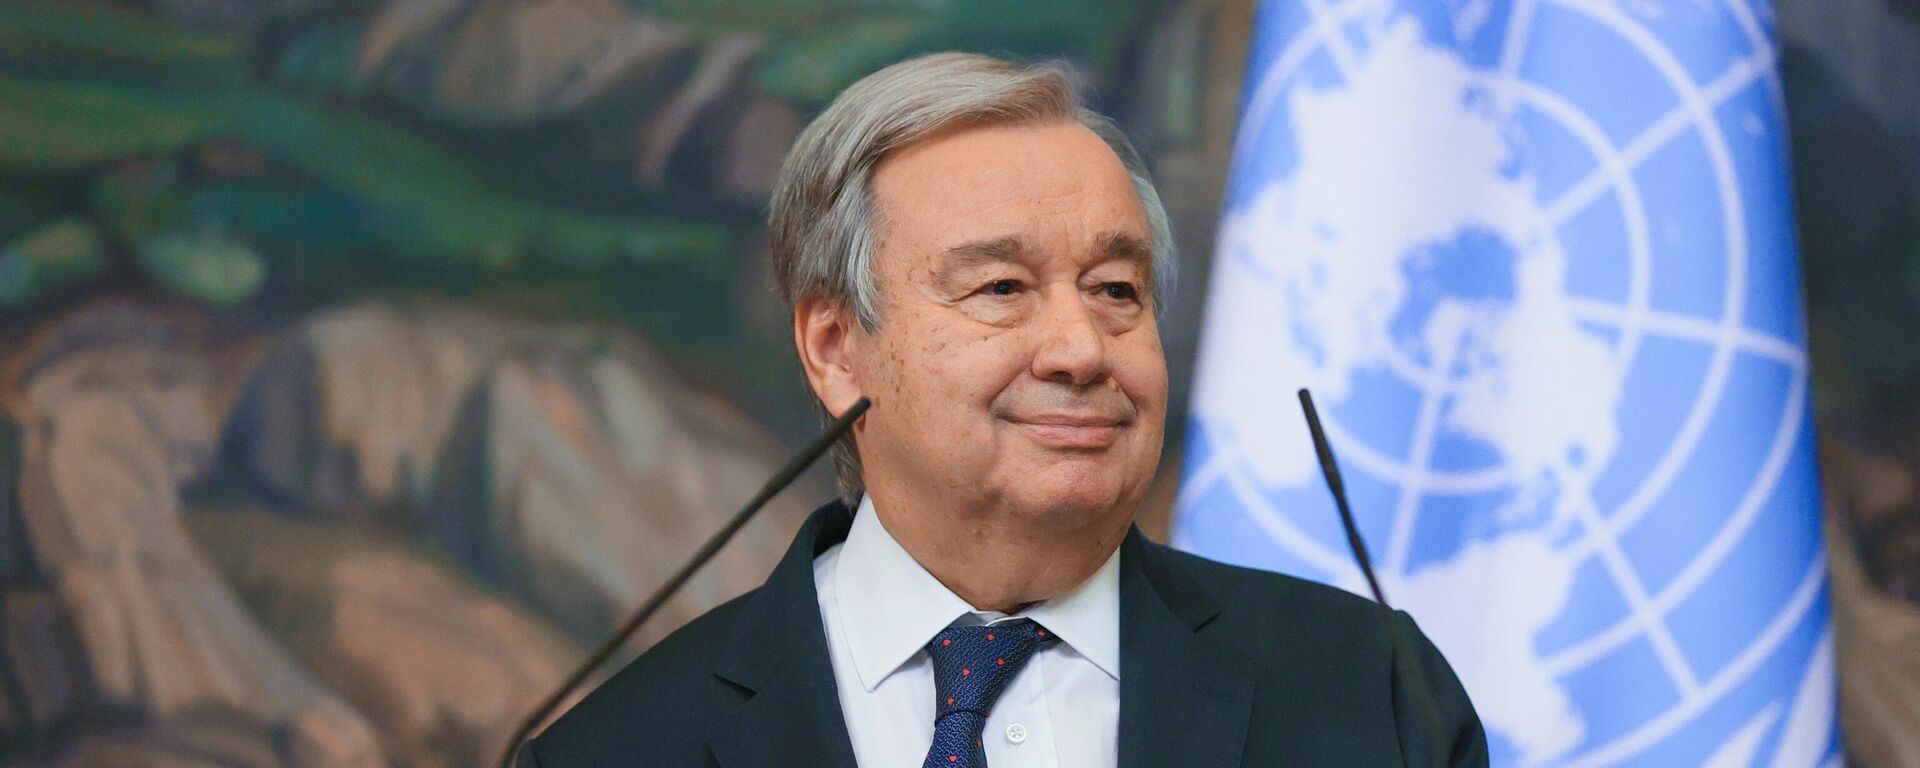 UN Secretary-General António Guterres at a press conference following a meeting in Moscow with Russian Foreign Minister Sergei Lavrov. - Sputnik Africa, 1920, 06.05.2023